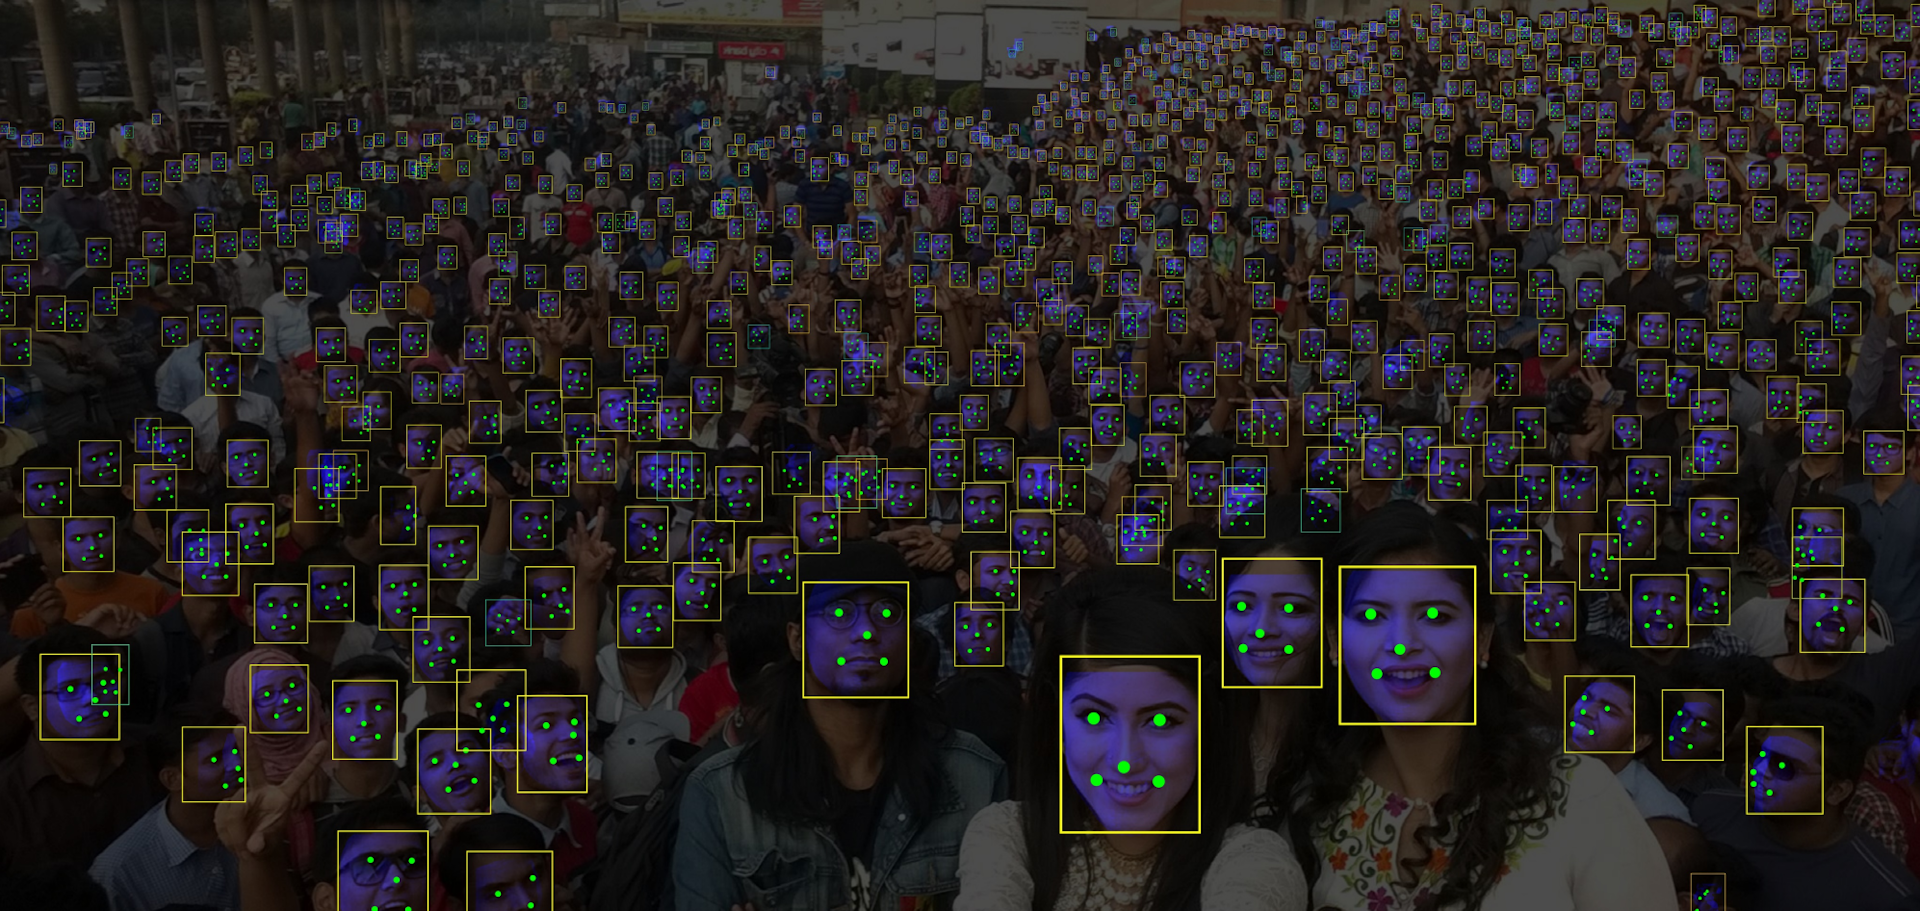 Face detection results